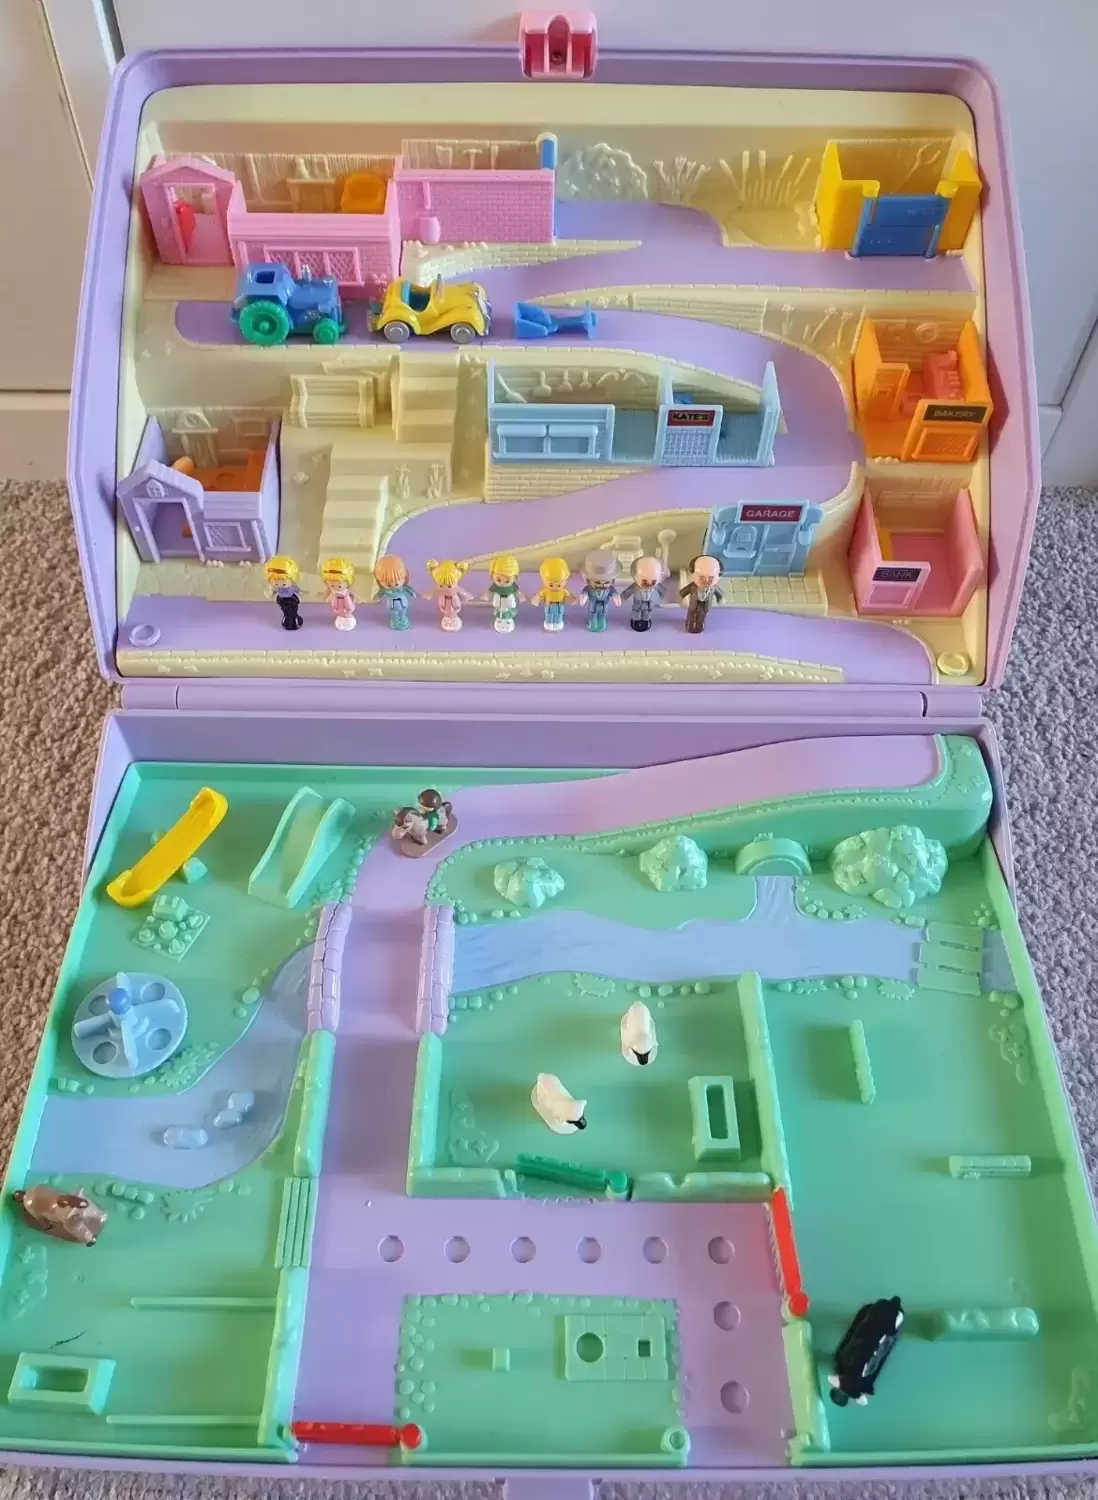 Polly Pocket (1989 - 1998) - Jewel Case Playset - Pink Polly’s House